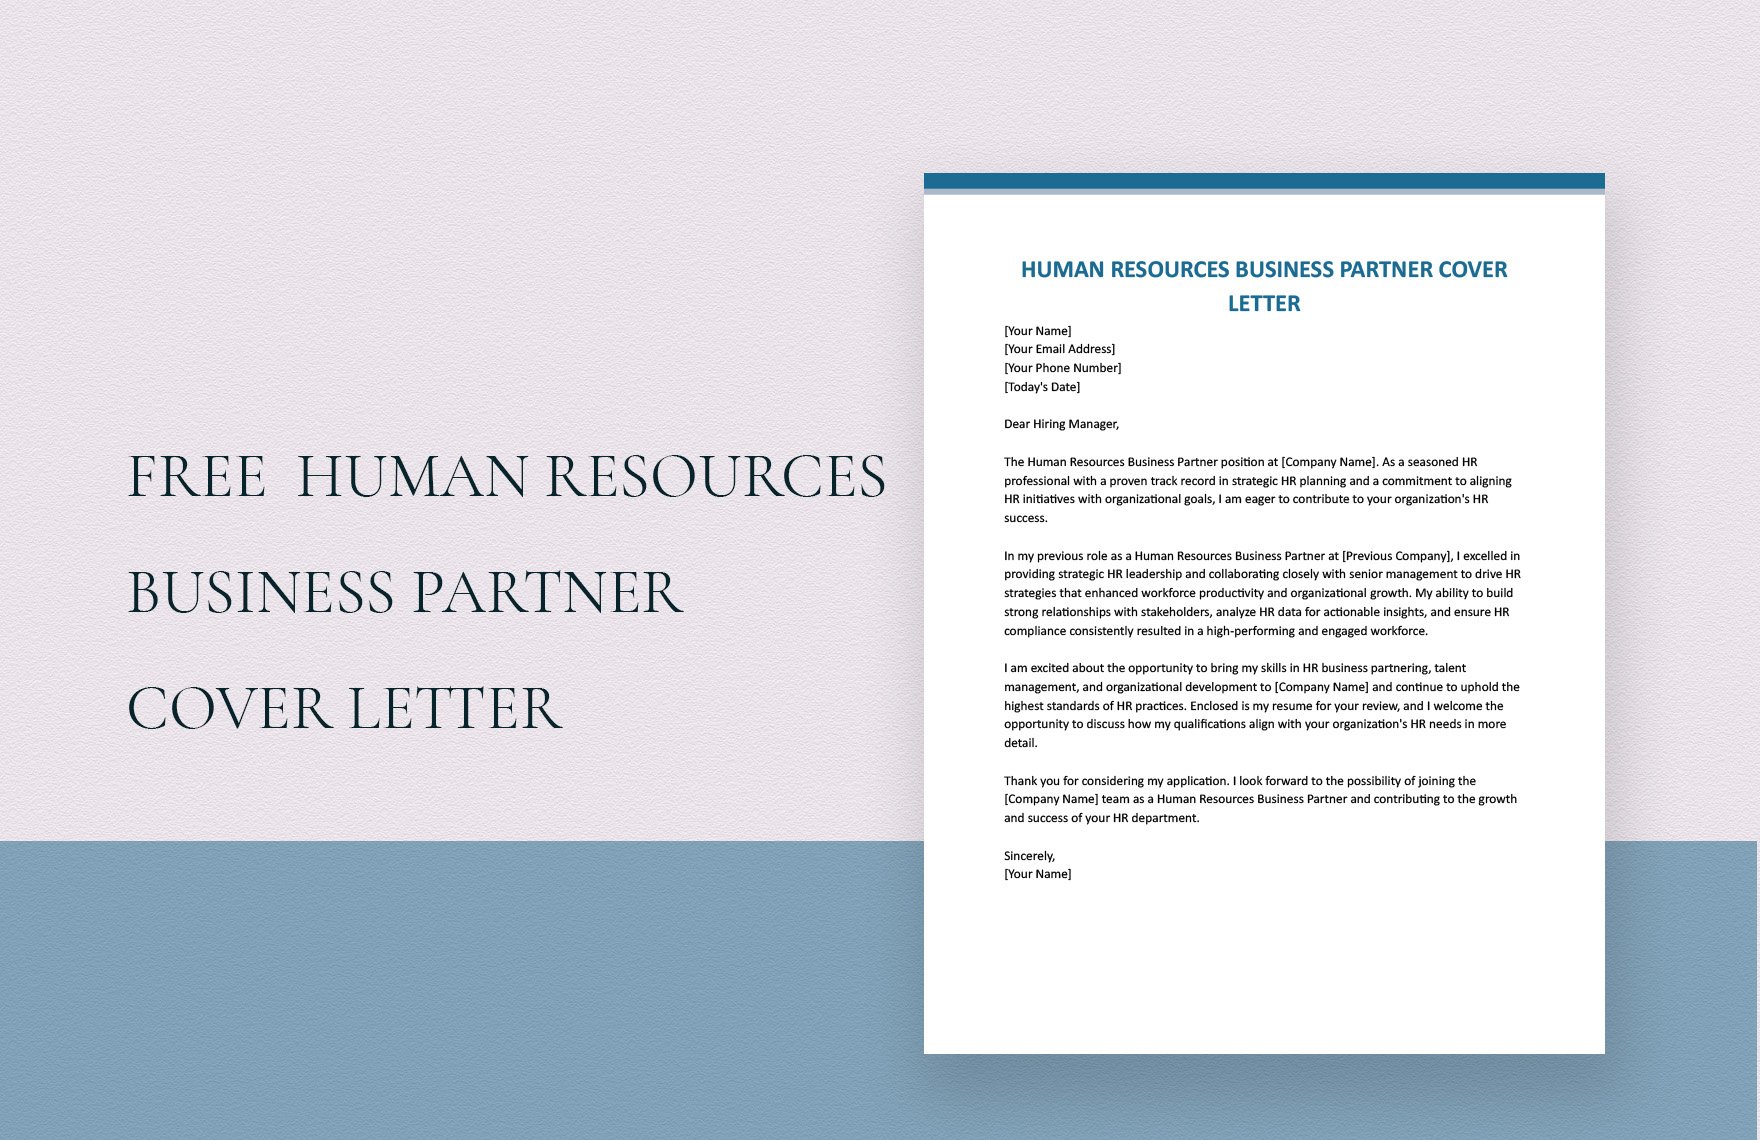 Human Resources Business Partner Cover Letter